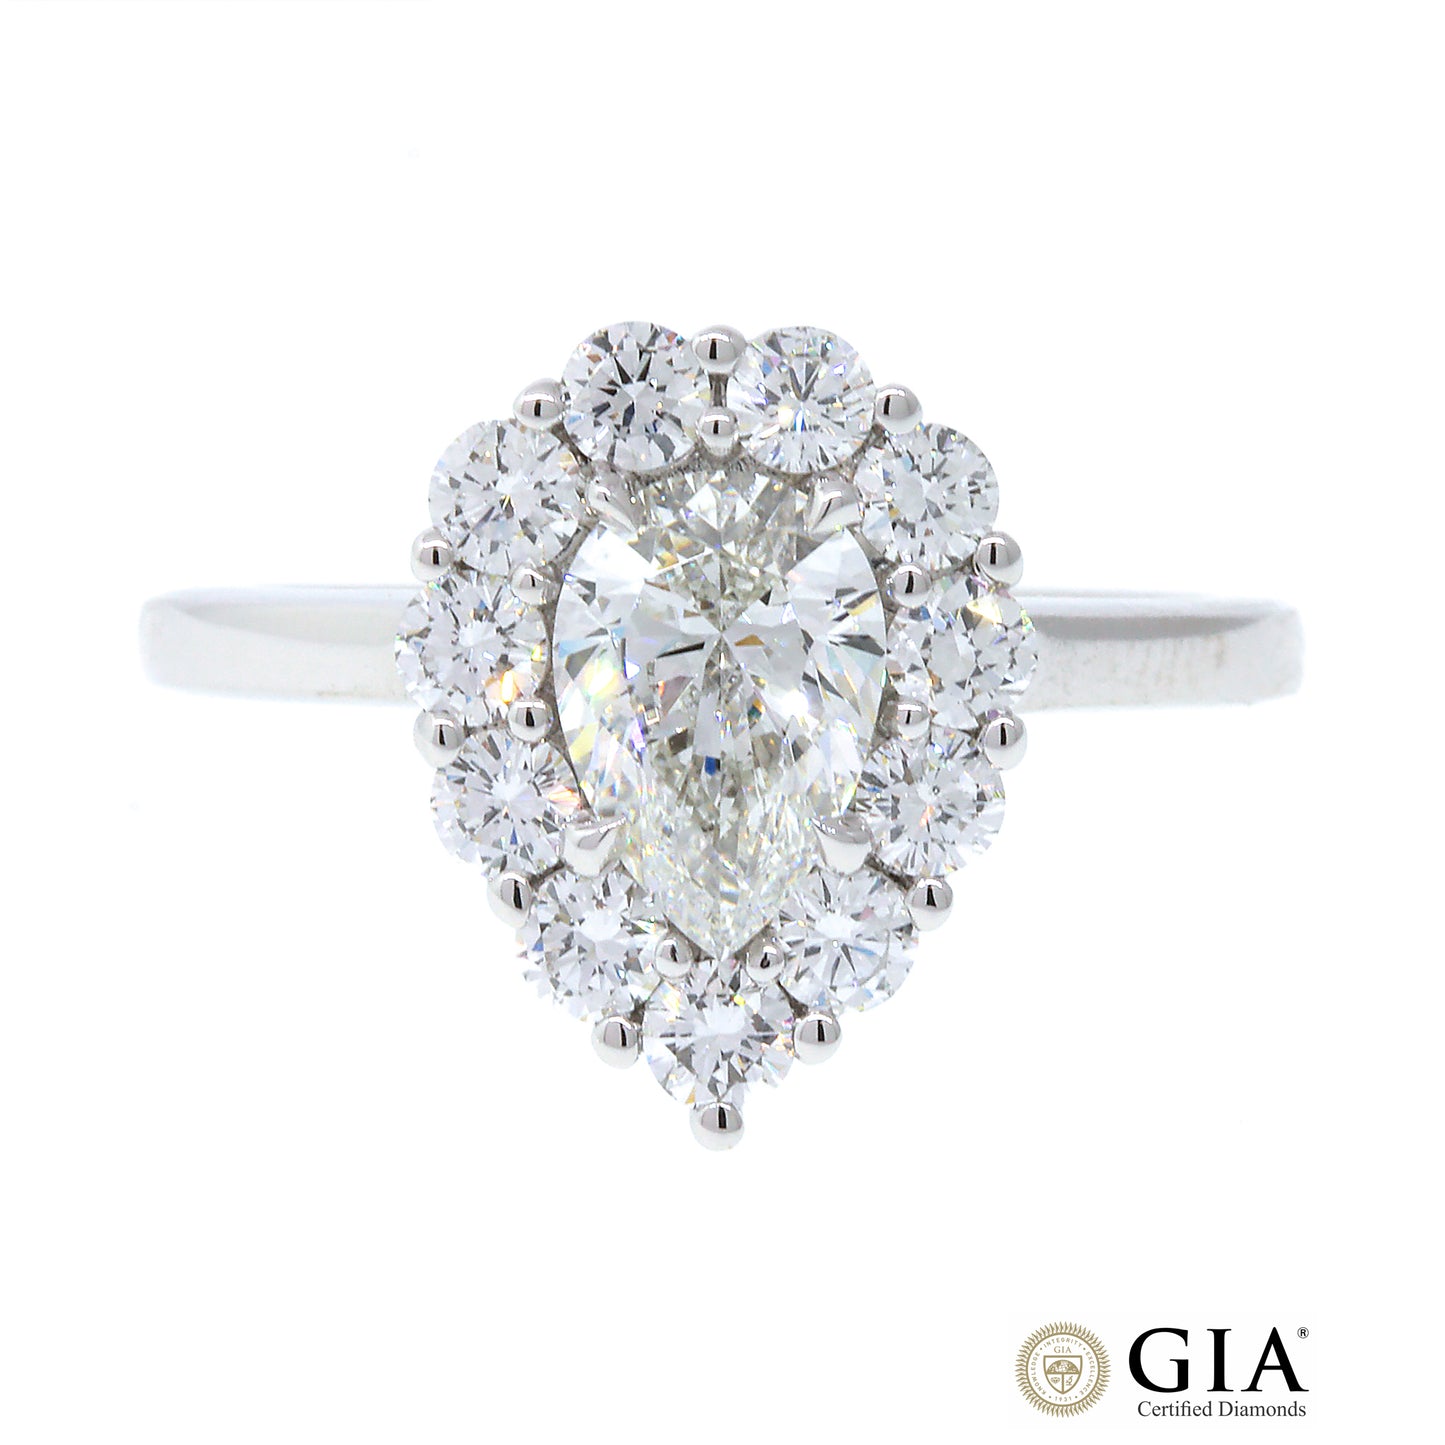 GIA Certified Pear Shaped Diamond Engagement Ring in 14k White Gold